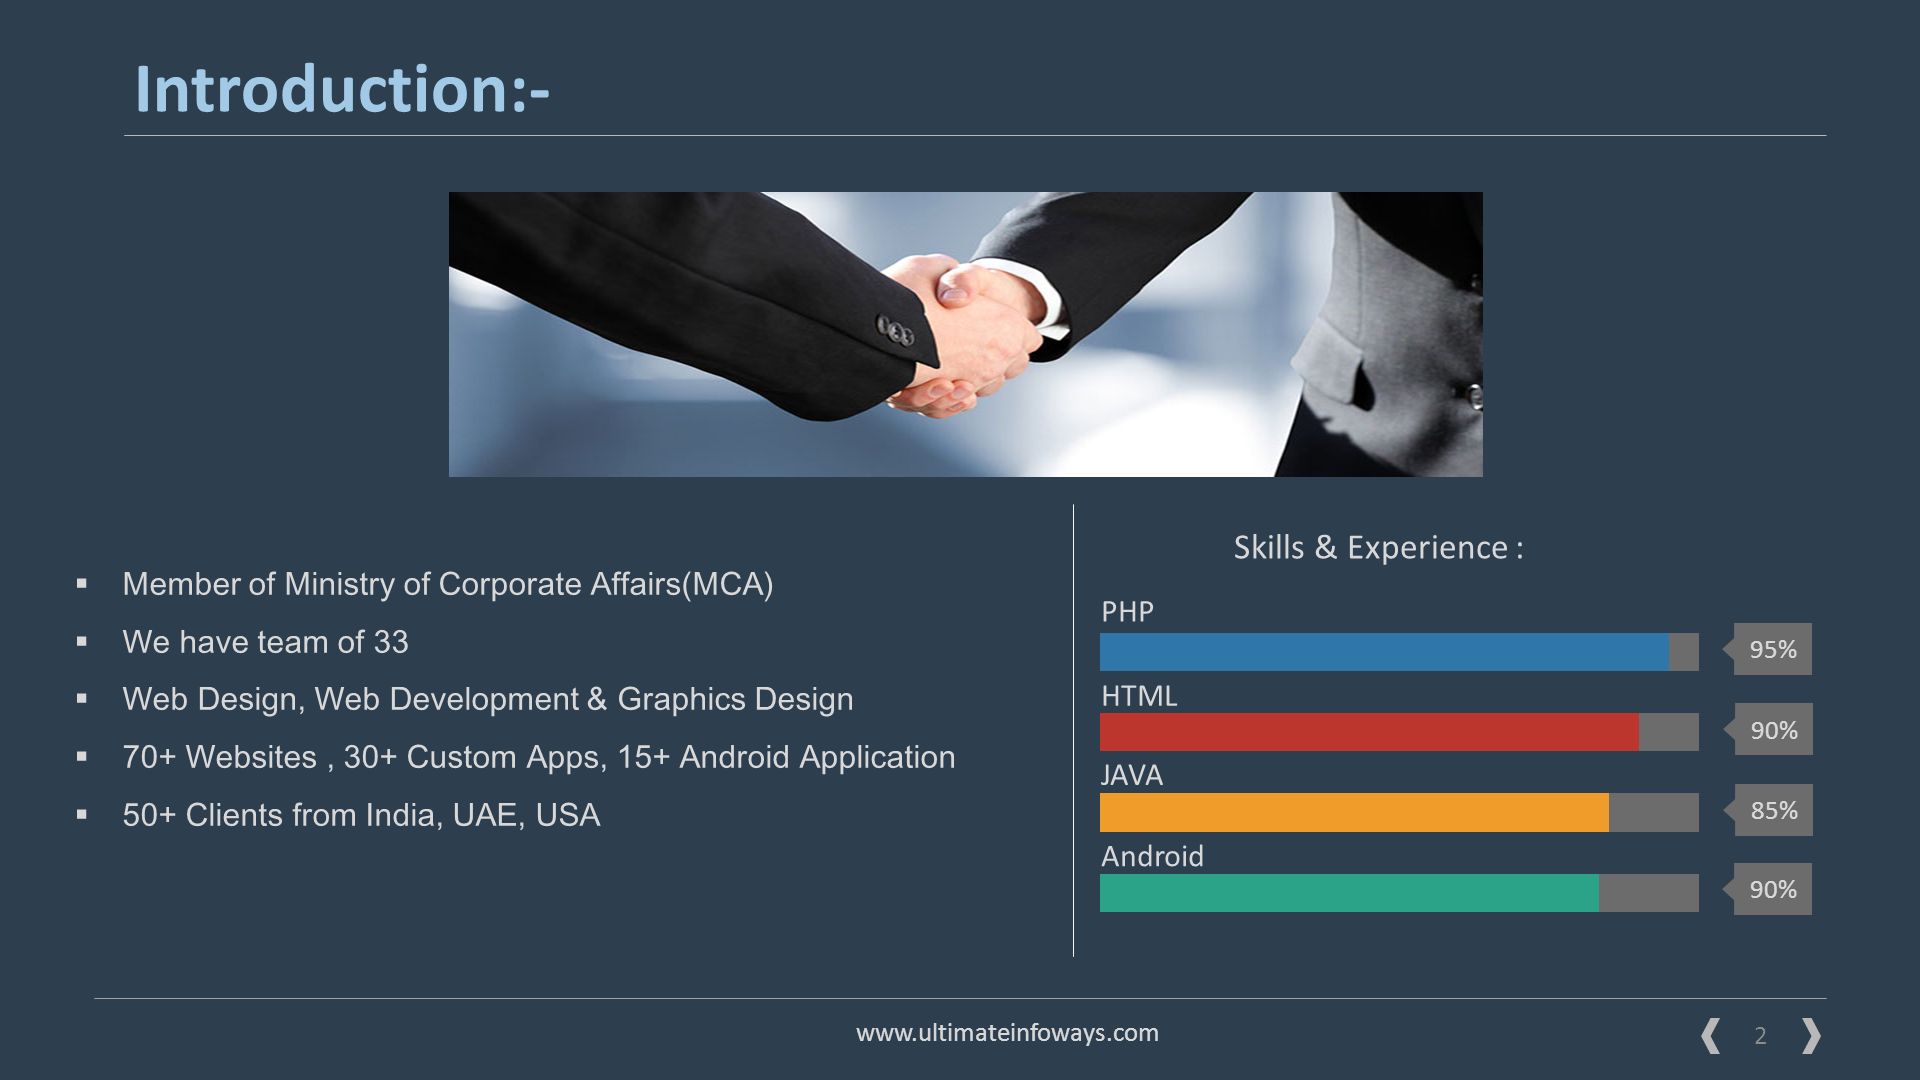 2 Solutions   Introduction:-  Member of Ministry of Corporate Affairs(MCA)  We have team of 33  Web Design, Web Development & Graphics Design  70+ Websites, 30+ Custom Apps, 15+ Android Application  50+ Clients from India, UAE, USA Skills & Experience : 95% 90% 85% 90%   PHP HTML JAVA Android